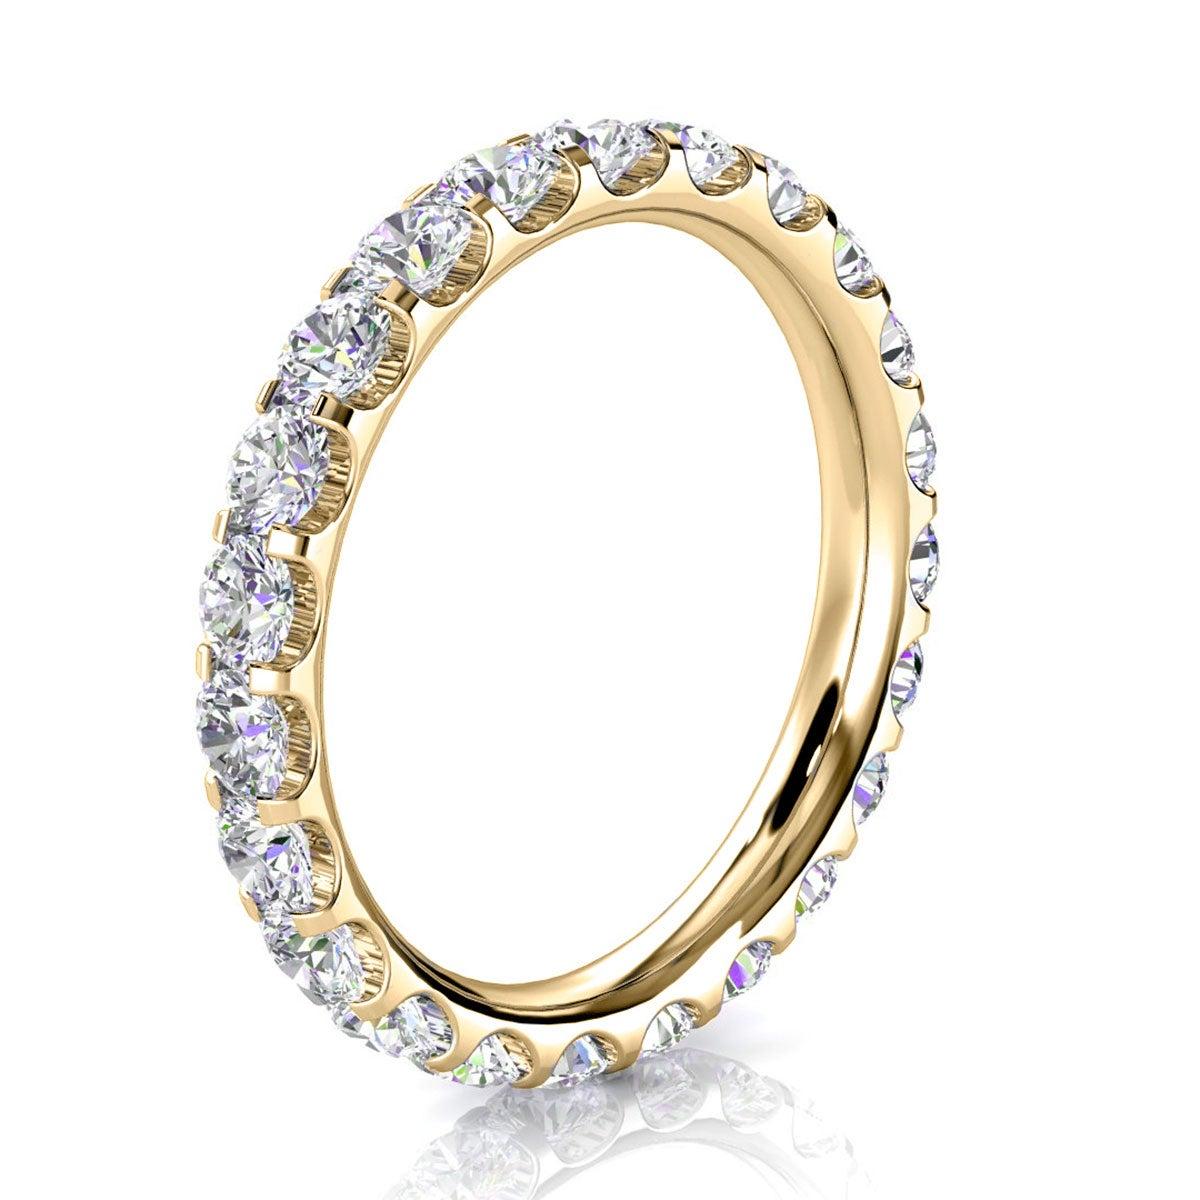 For Sale:  18k Yellow Gold Viola Eternity Micro-Prong Diamond Ring '1 1/2 Ct. Tw' 2